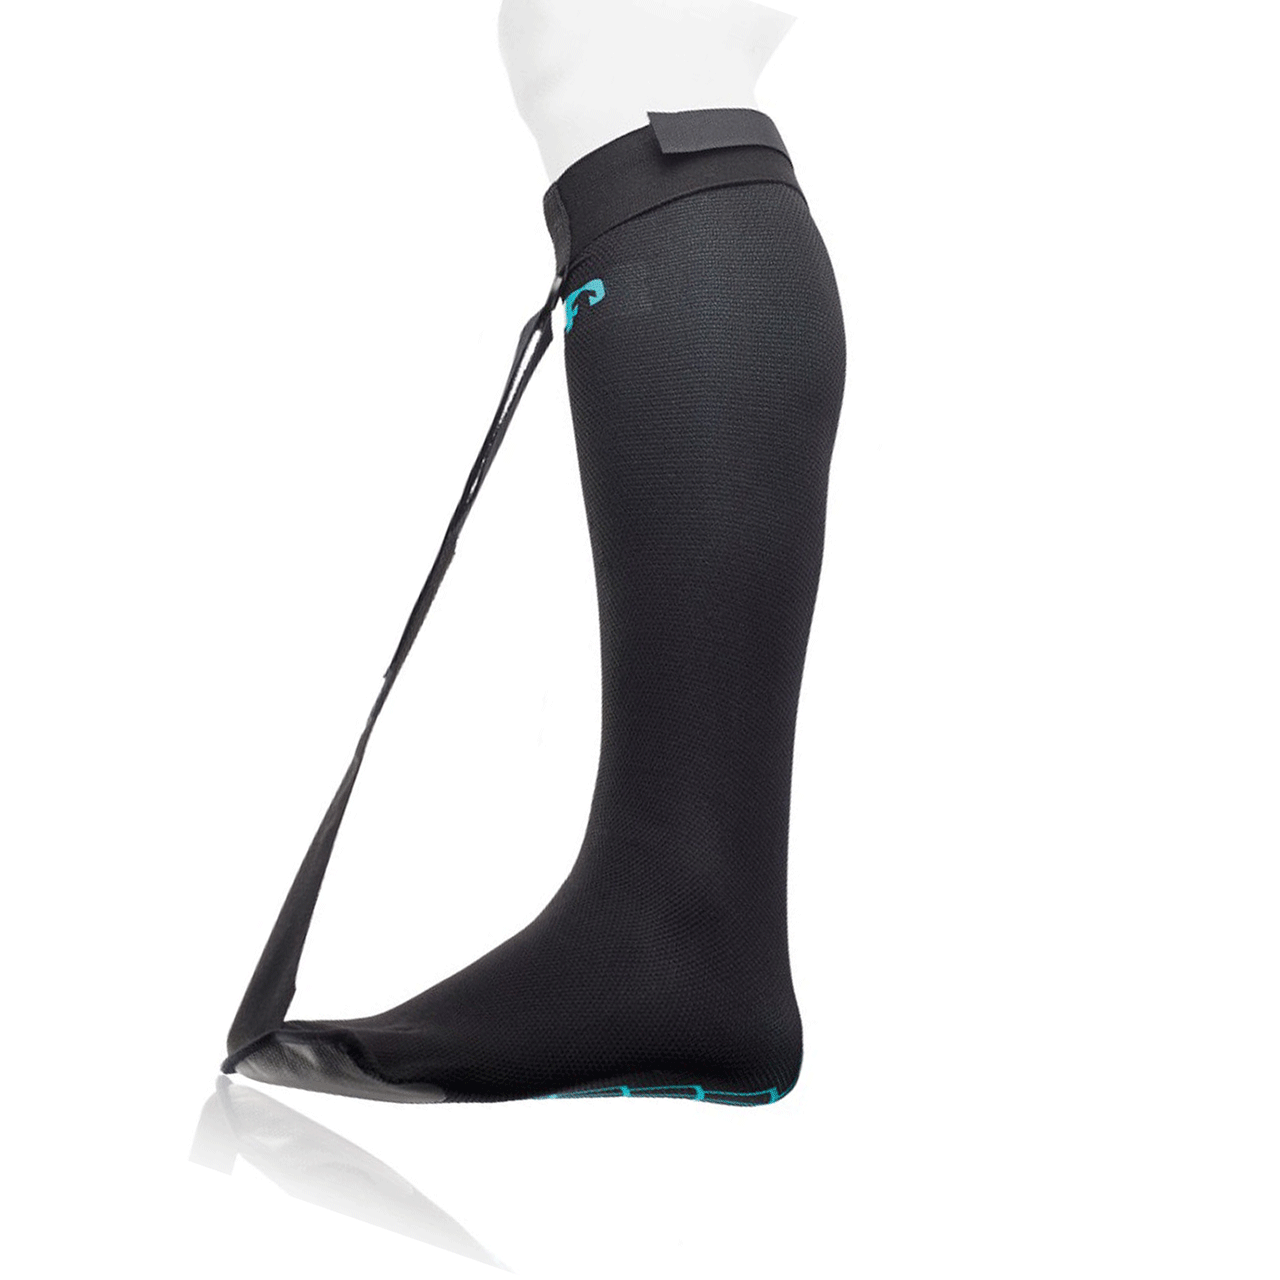 AFO ankle-foot-orthesis Foot-up Sock-up goural